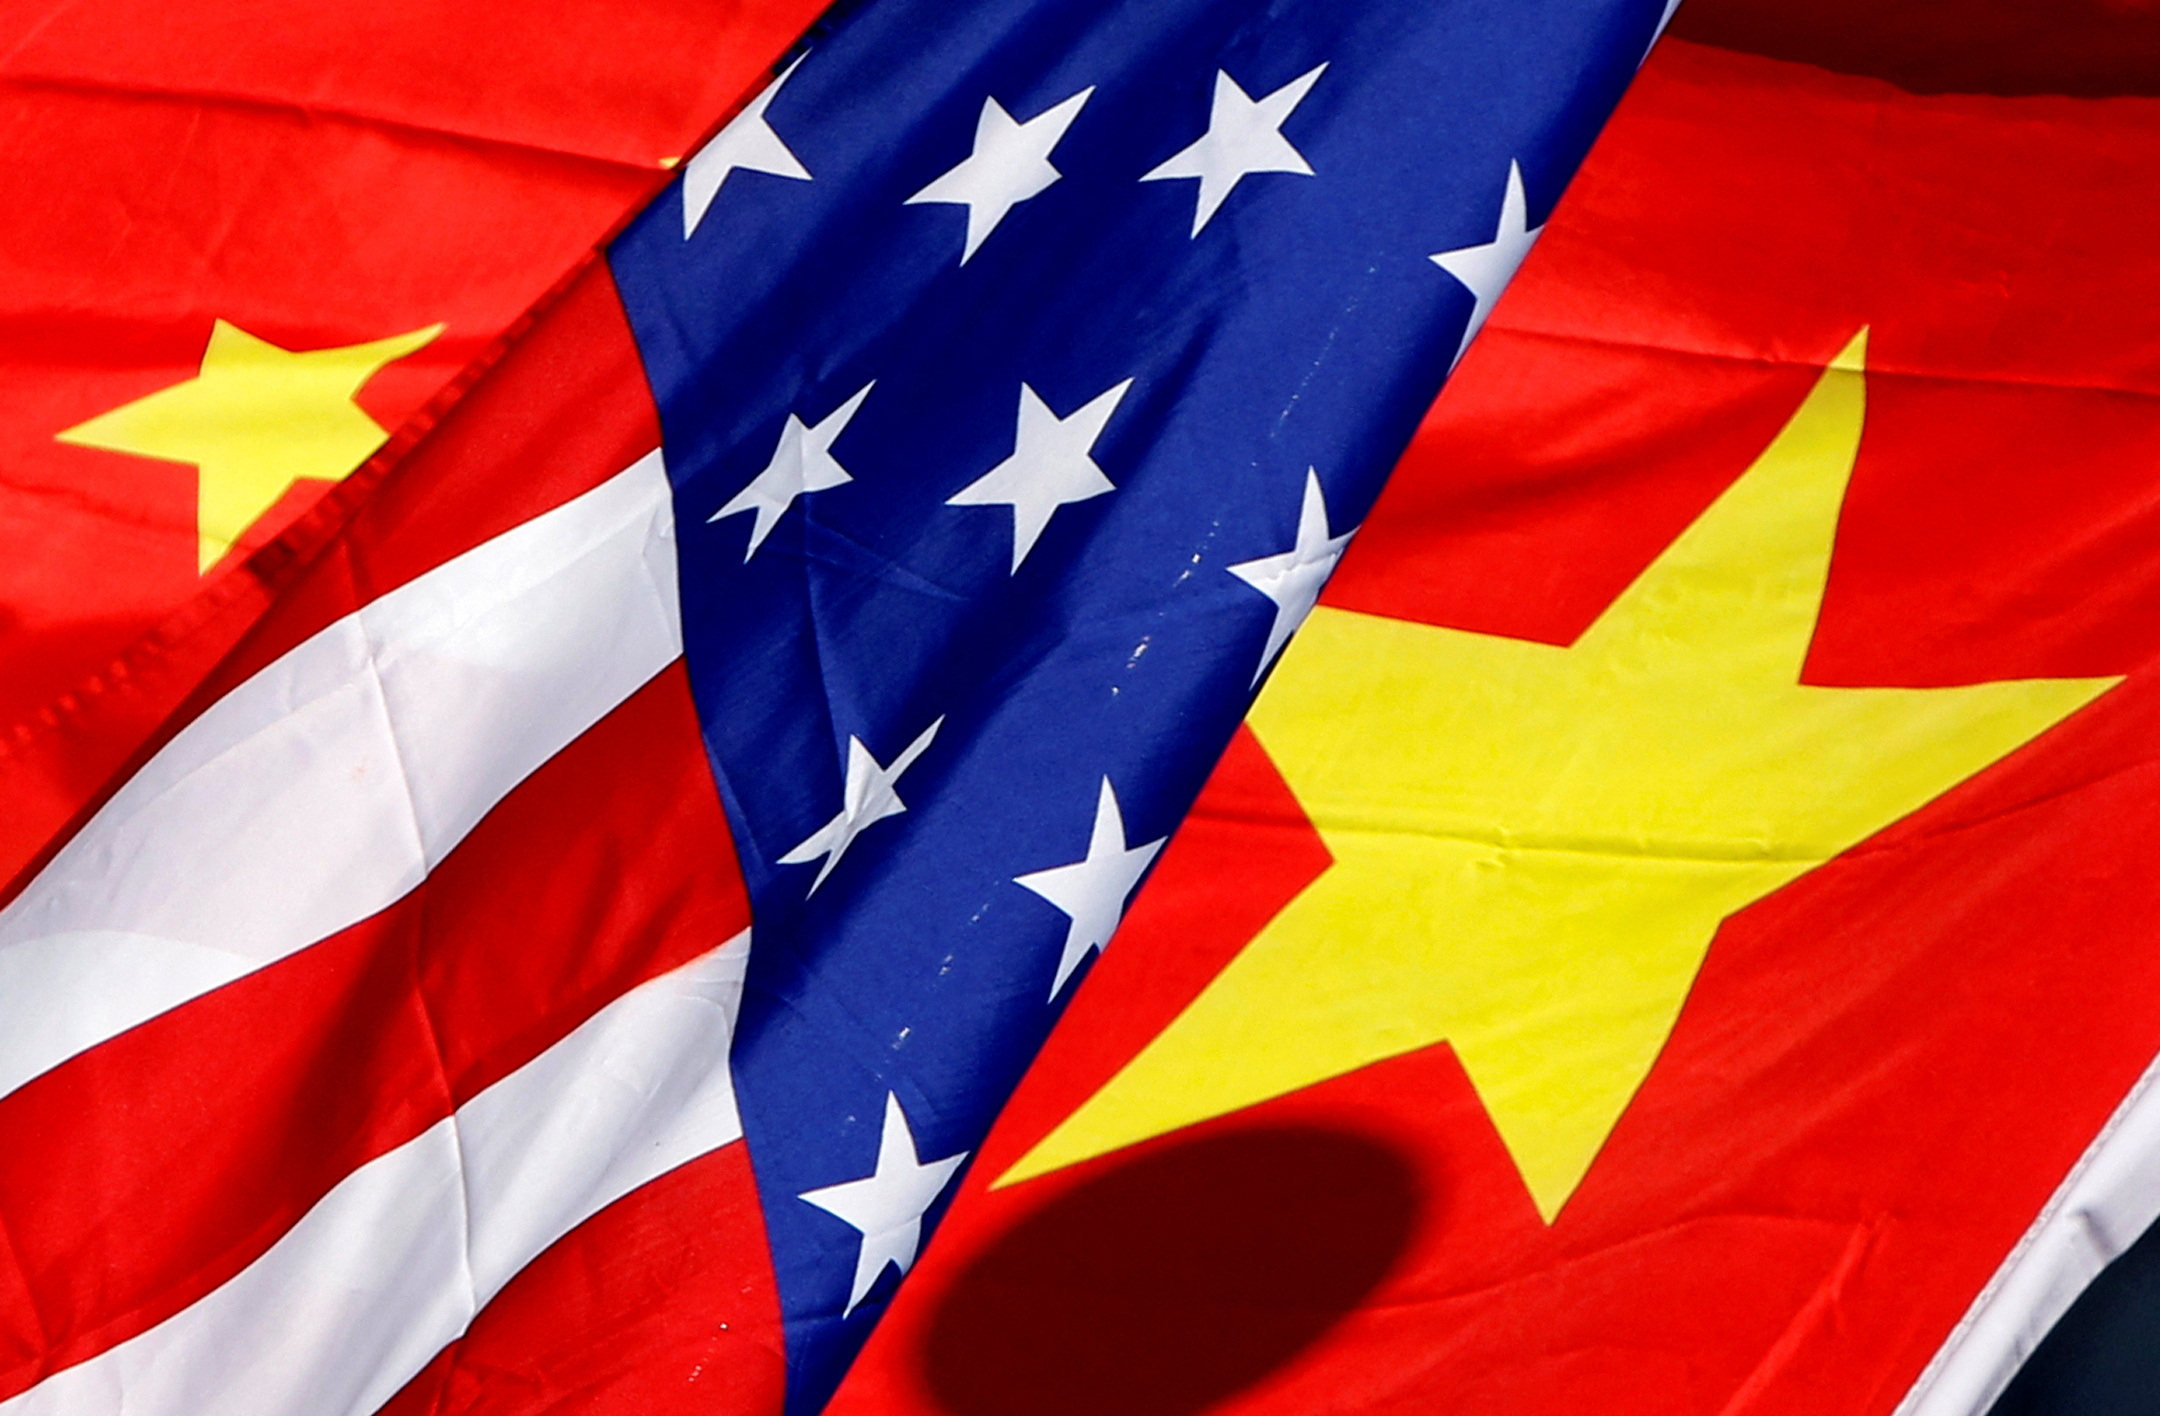 China’s support for Russia is one of the many issues threatening to sour the recent improvement in relations between Beijing and Washington. Photo: Reuters